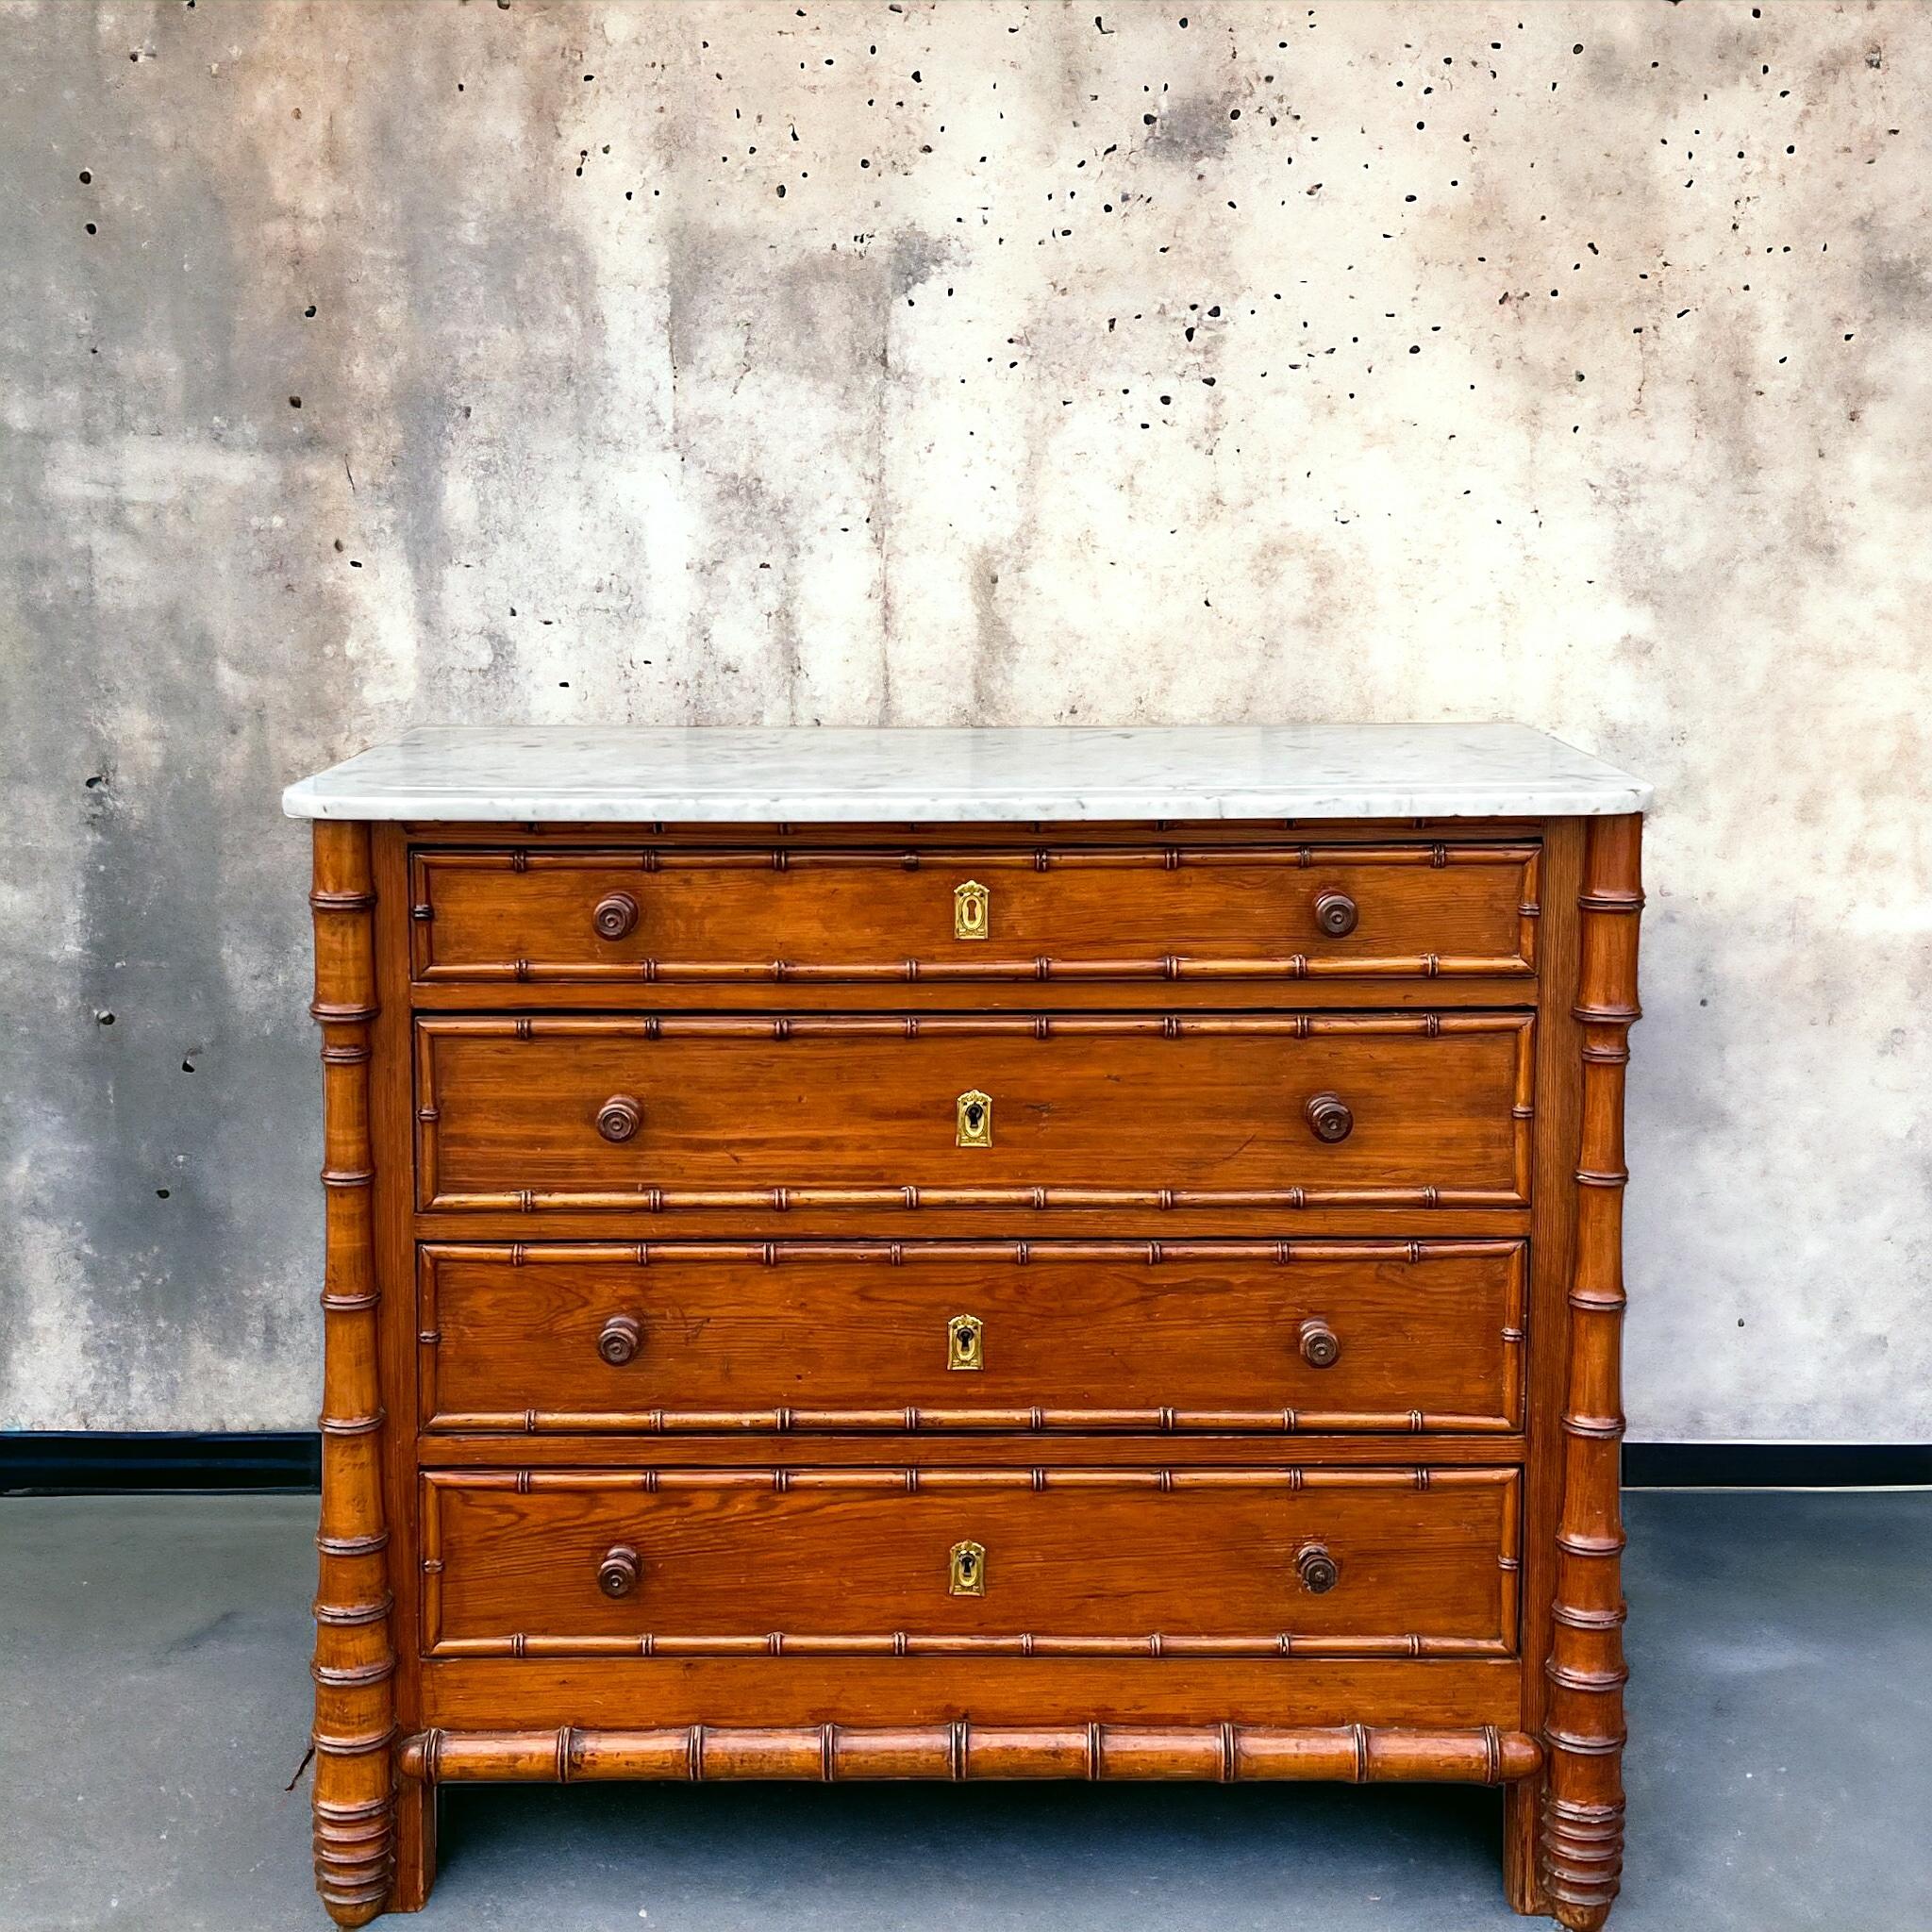 19th-C. French Aesthetic Movement Faux Bamboo Pine & Marble Chest / Commode For Sale 1